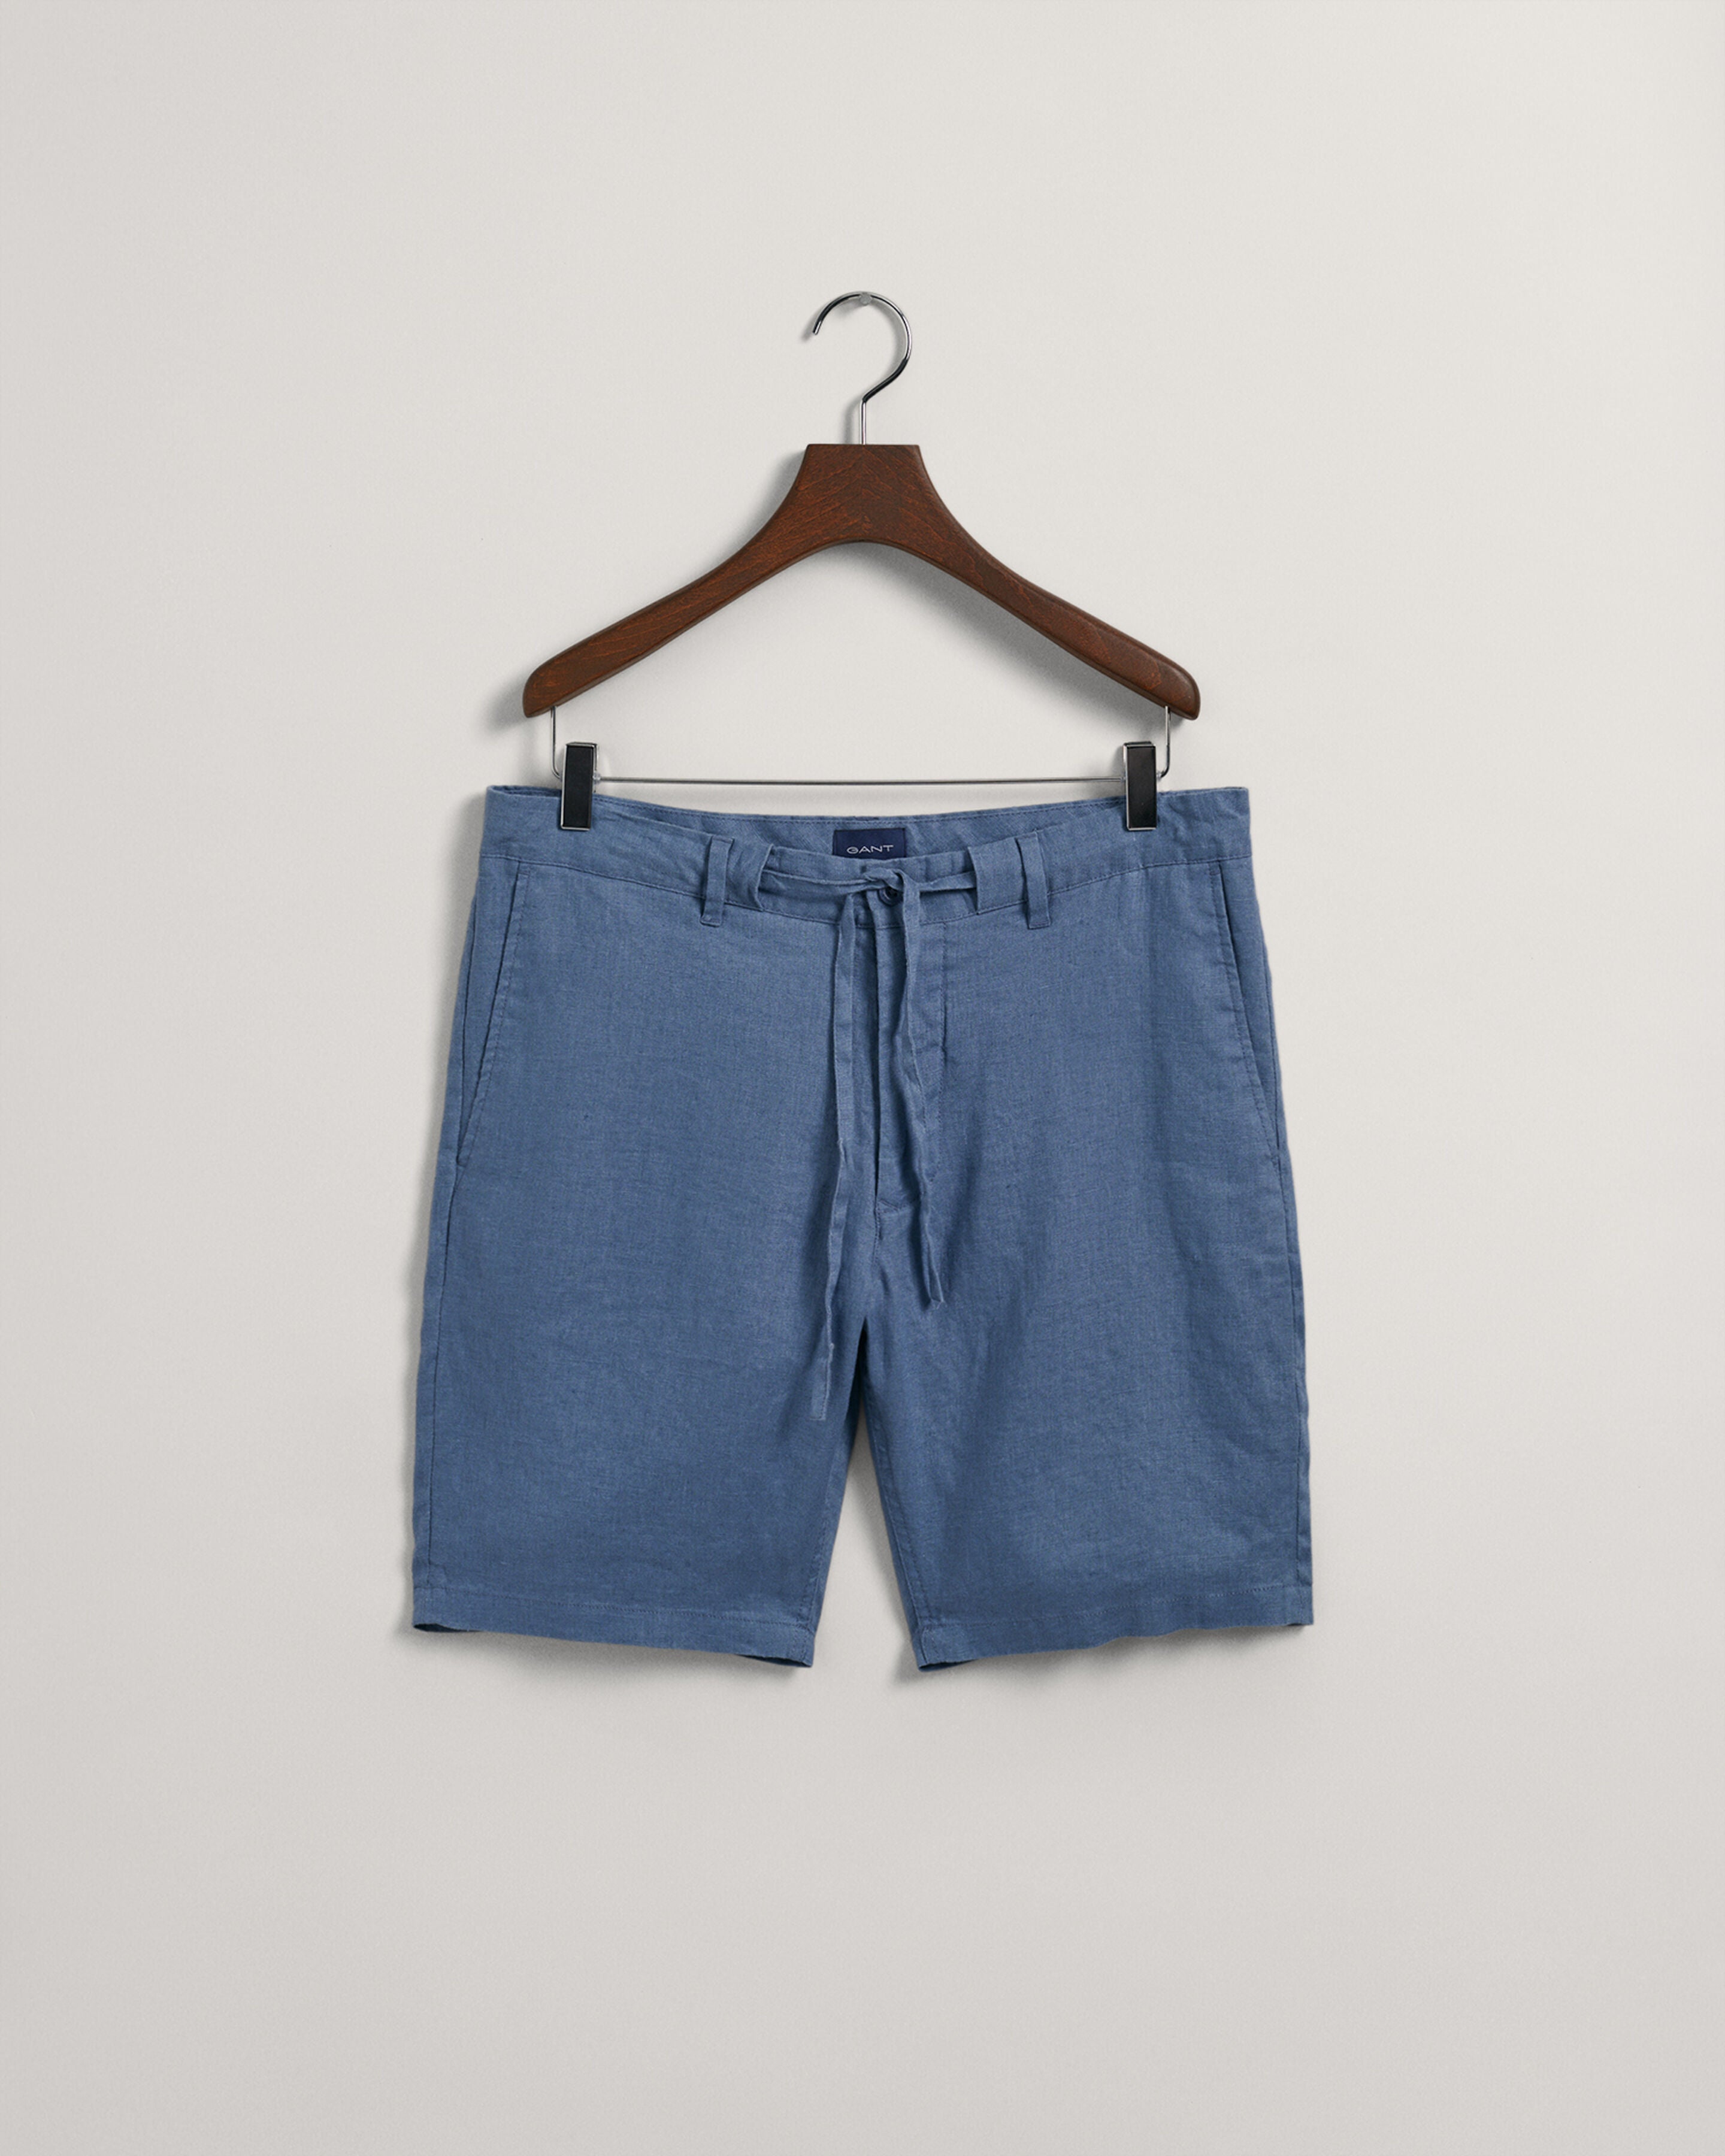 GANT - Relaxed Fit Linen Drawstring Shorts in Salty Sea Blue